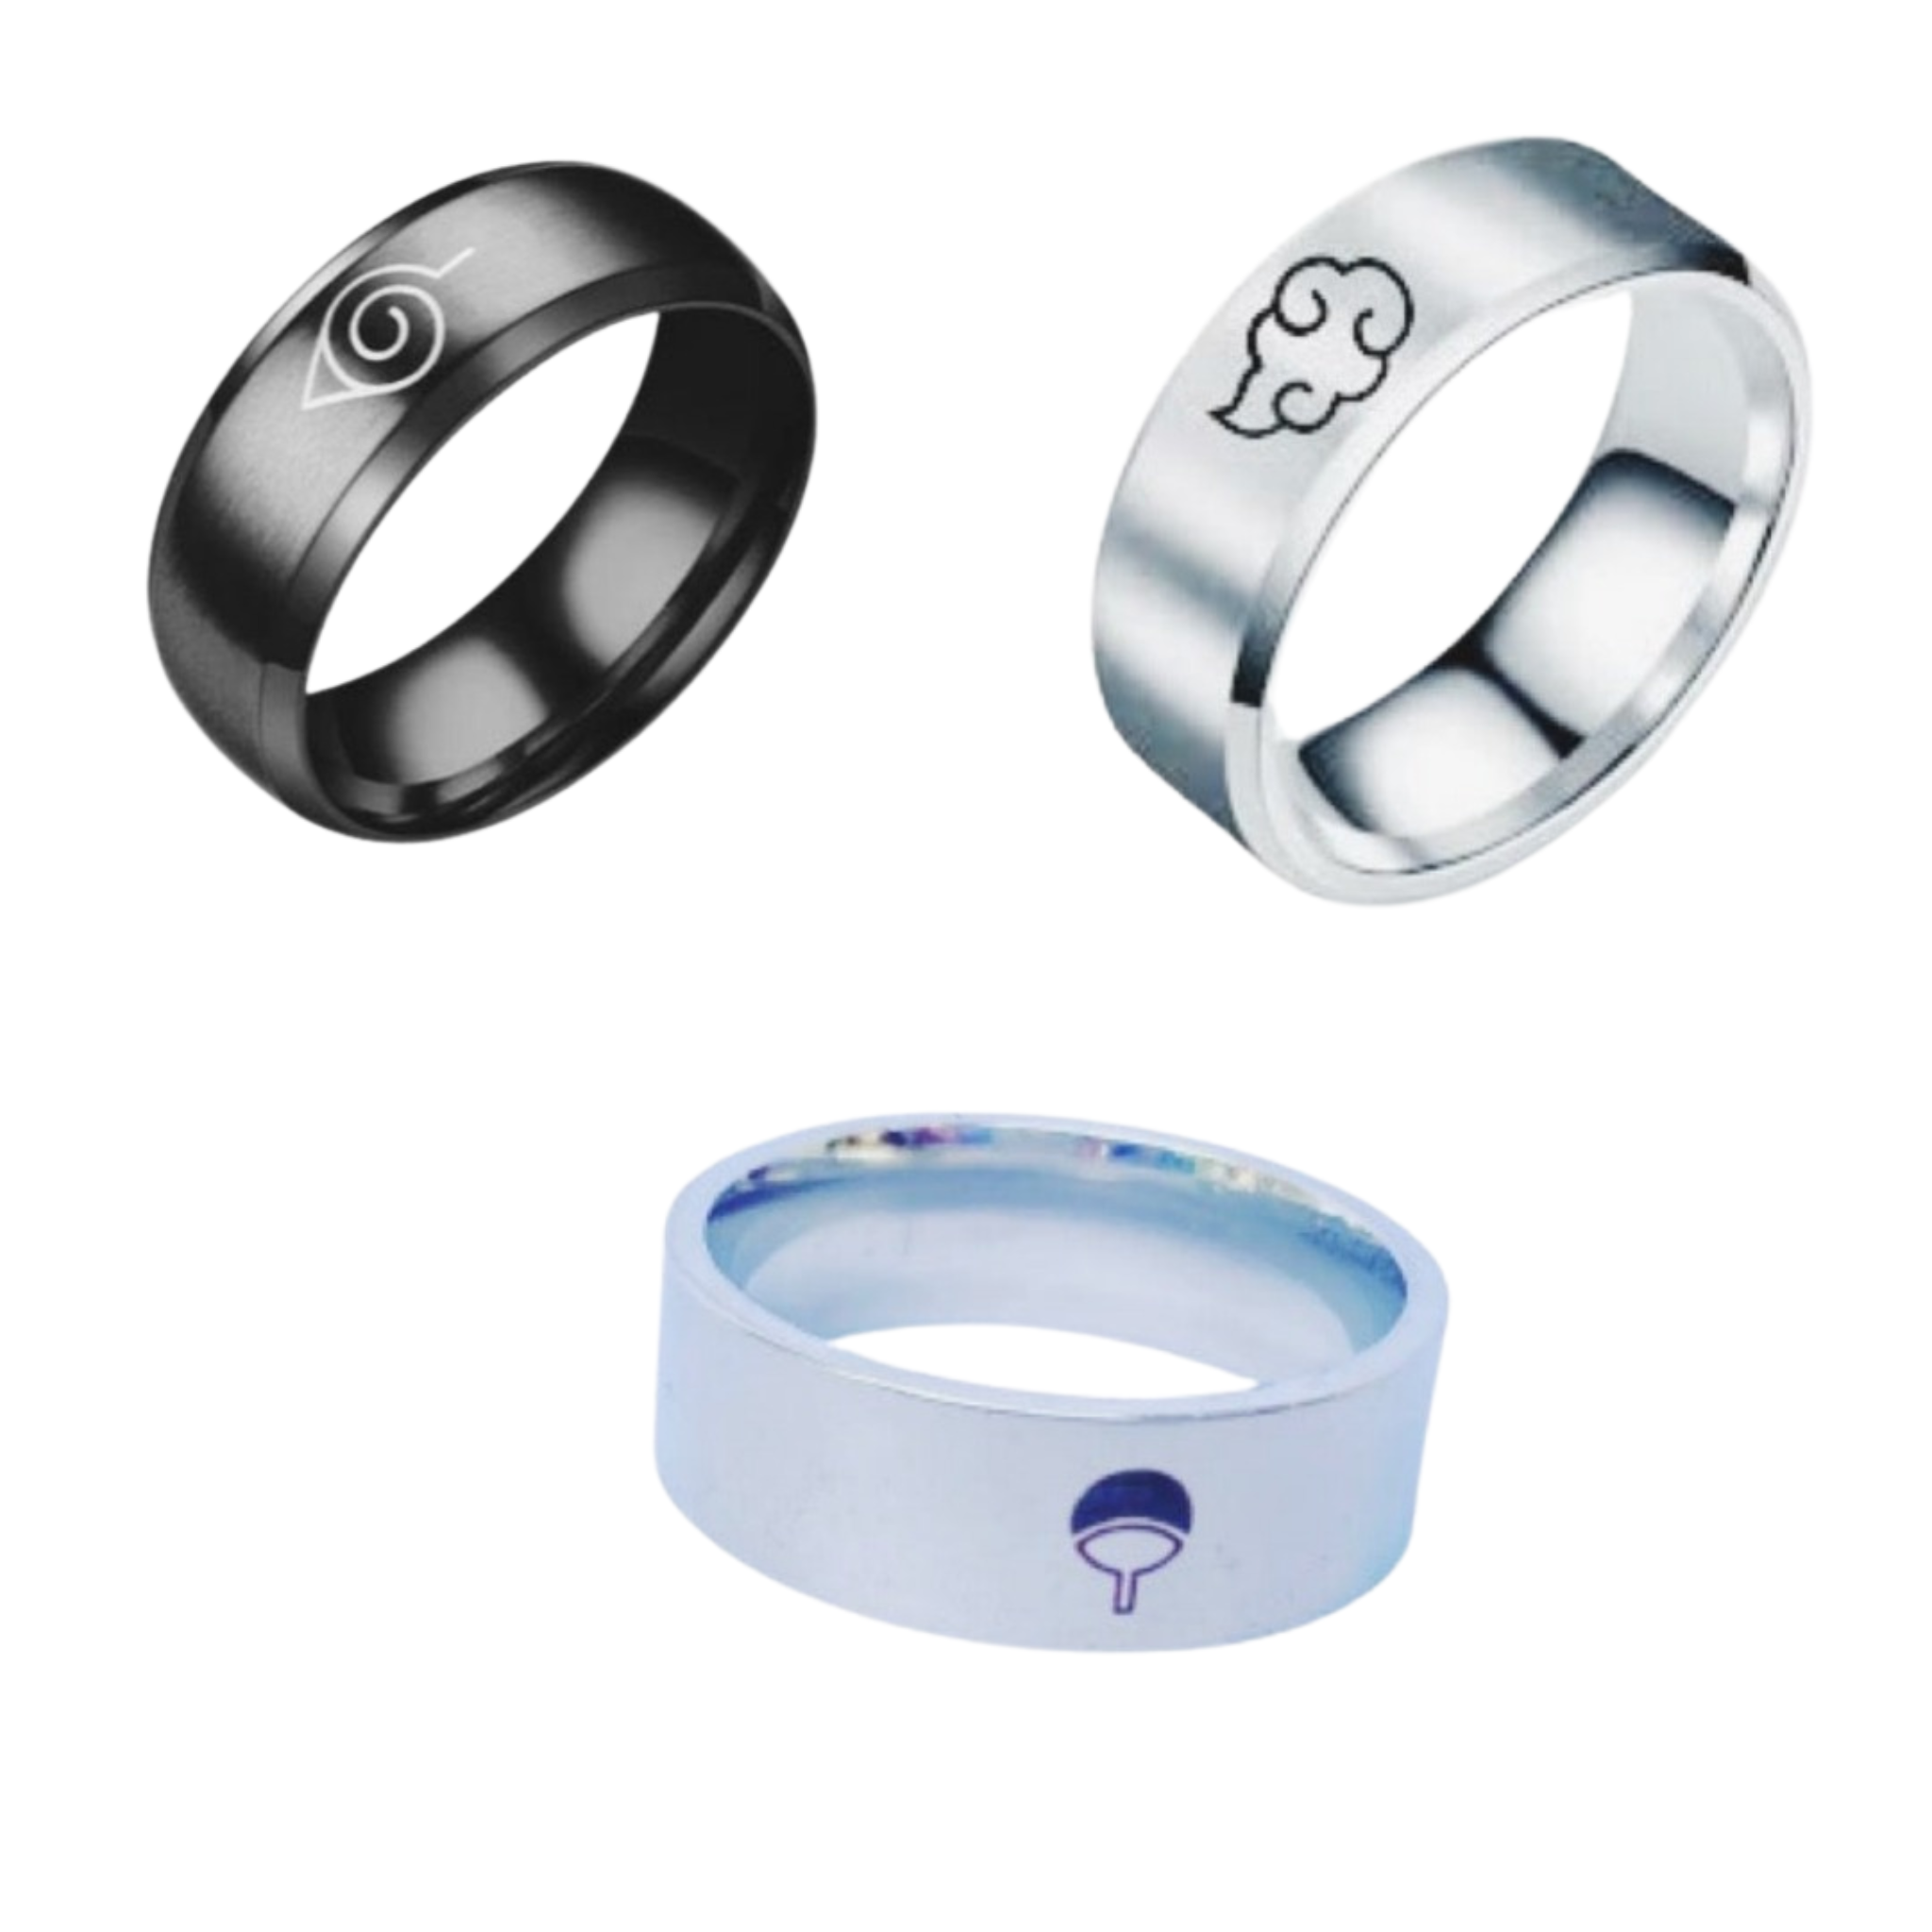 Buy Anime Ring Online In India  Etsy India